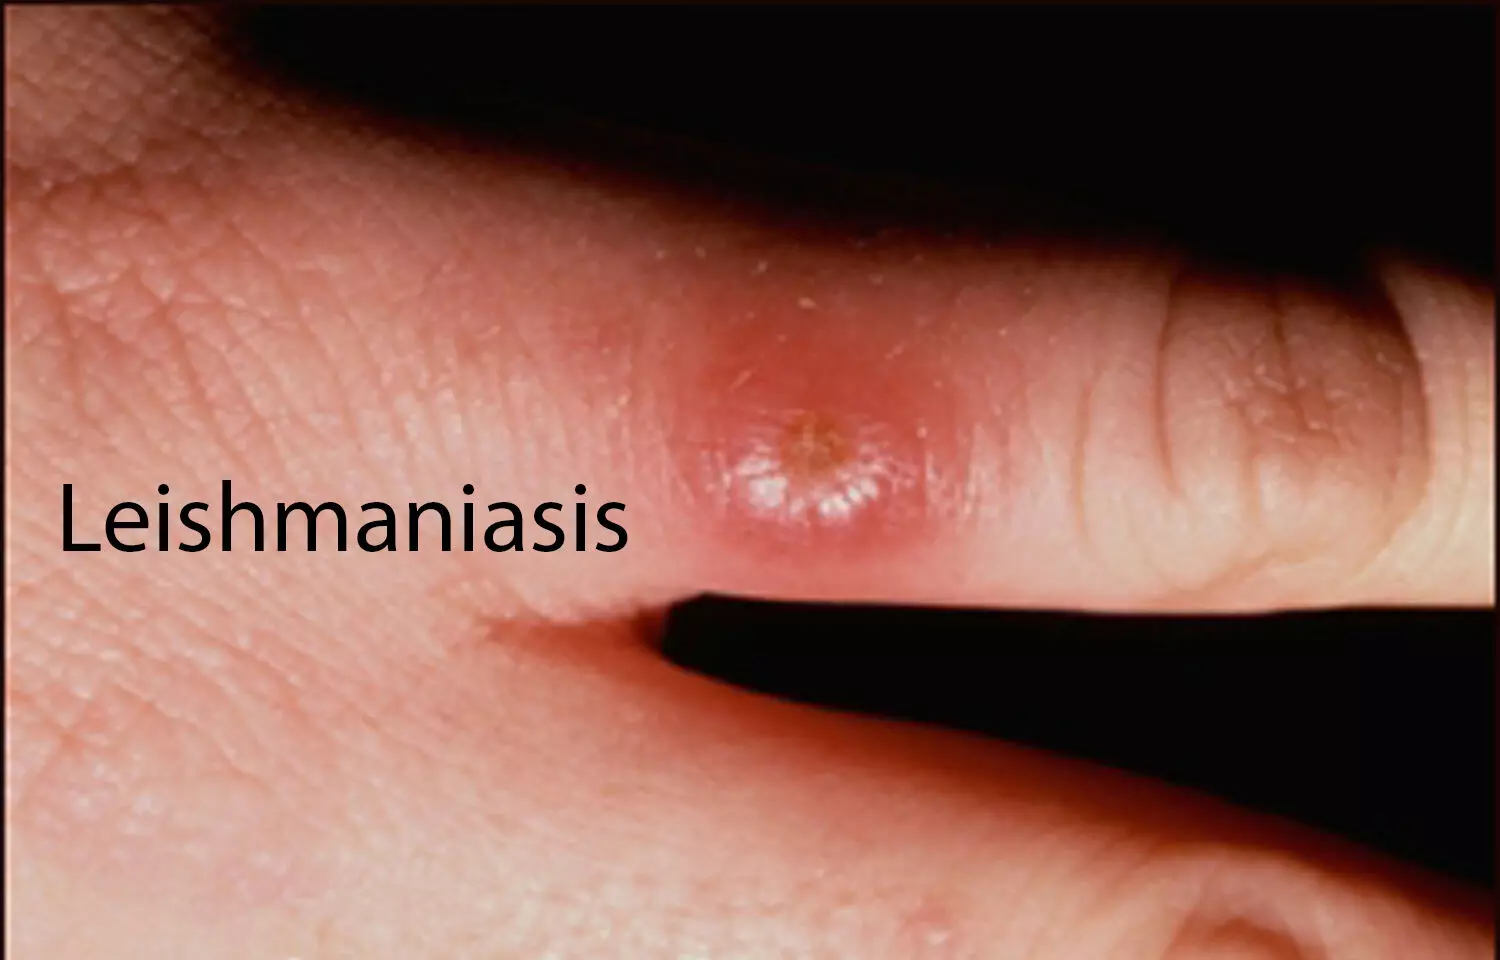 Peptides+antibiotic Combo more effective treatment option for leishmaniasis